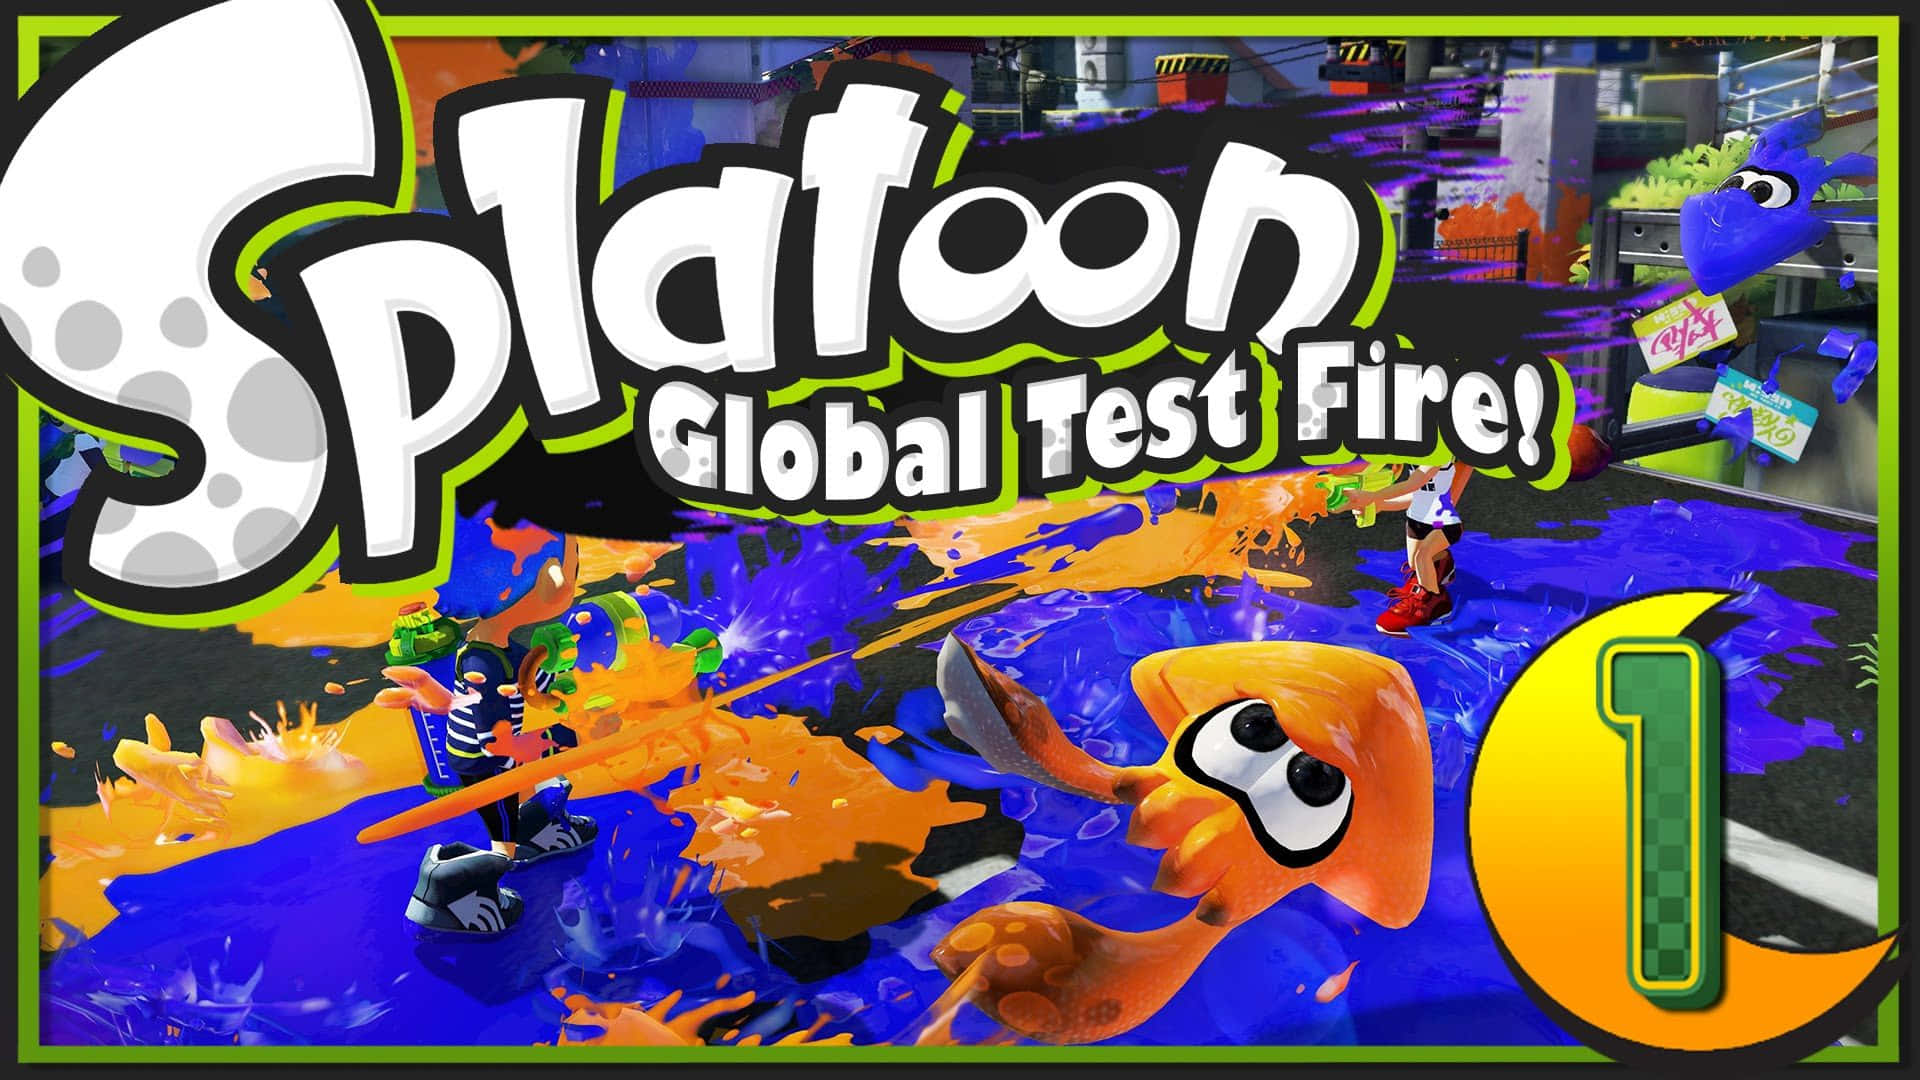 Battle it out on colorful turf in Splatoon!